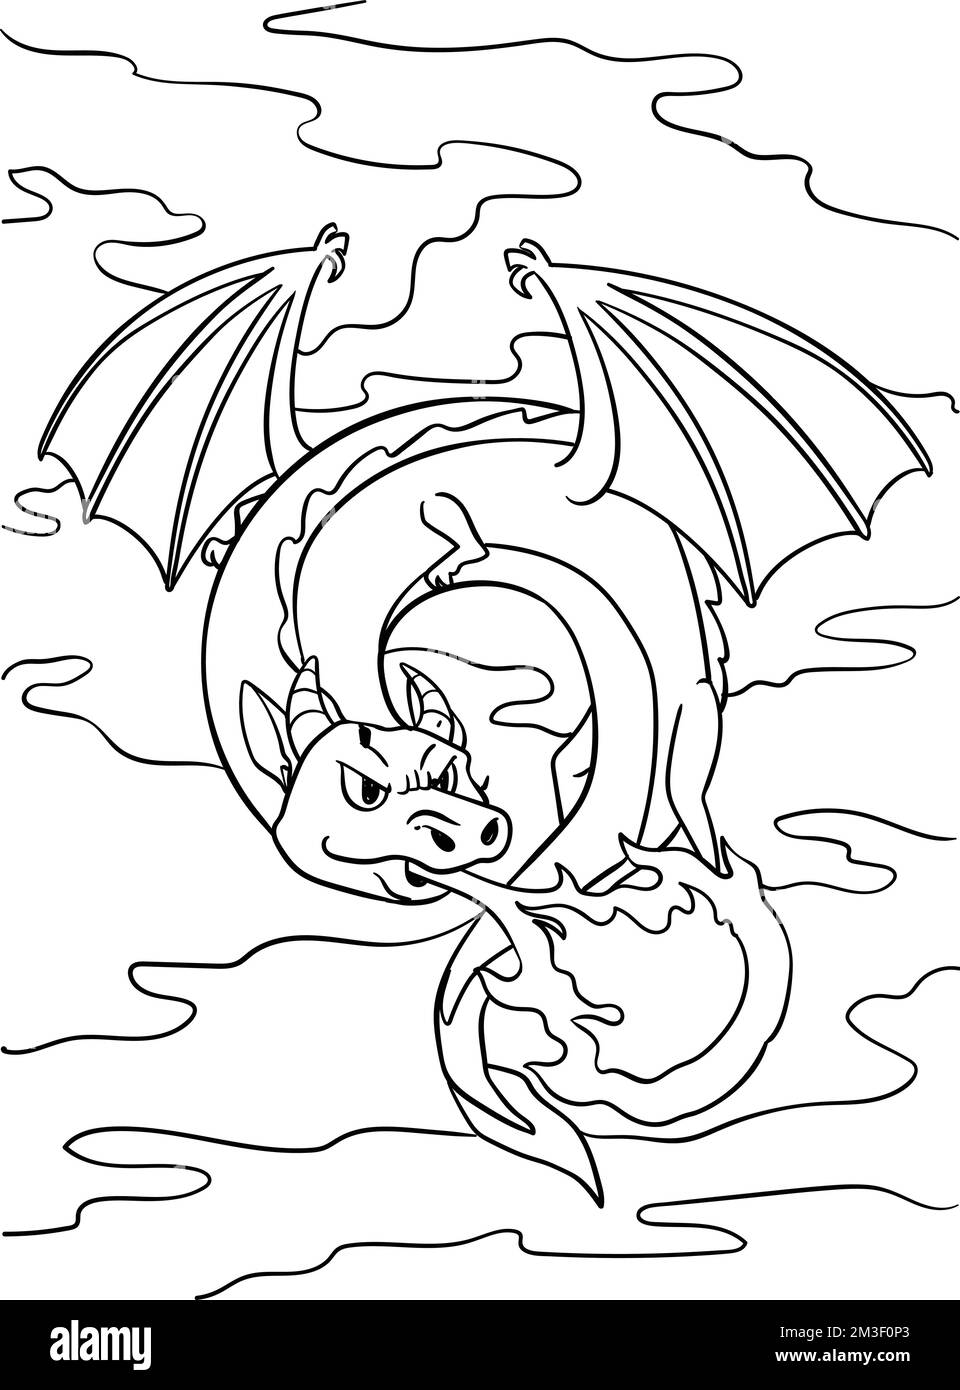 Knight Dragon Coloring Page for Kids Stock Vector